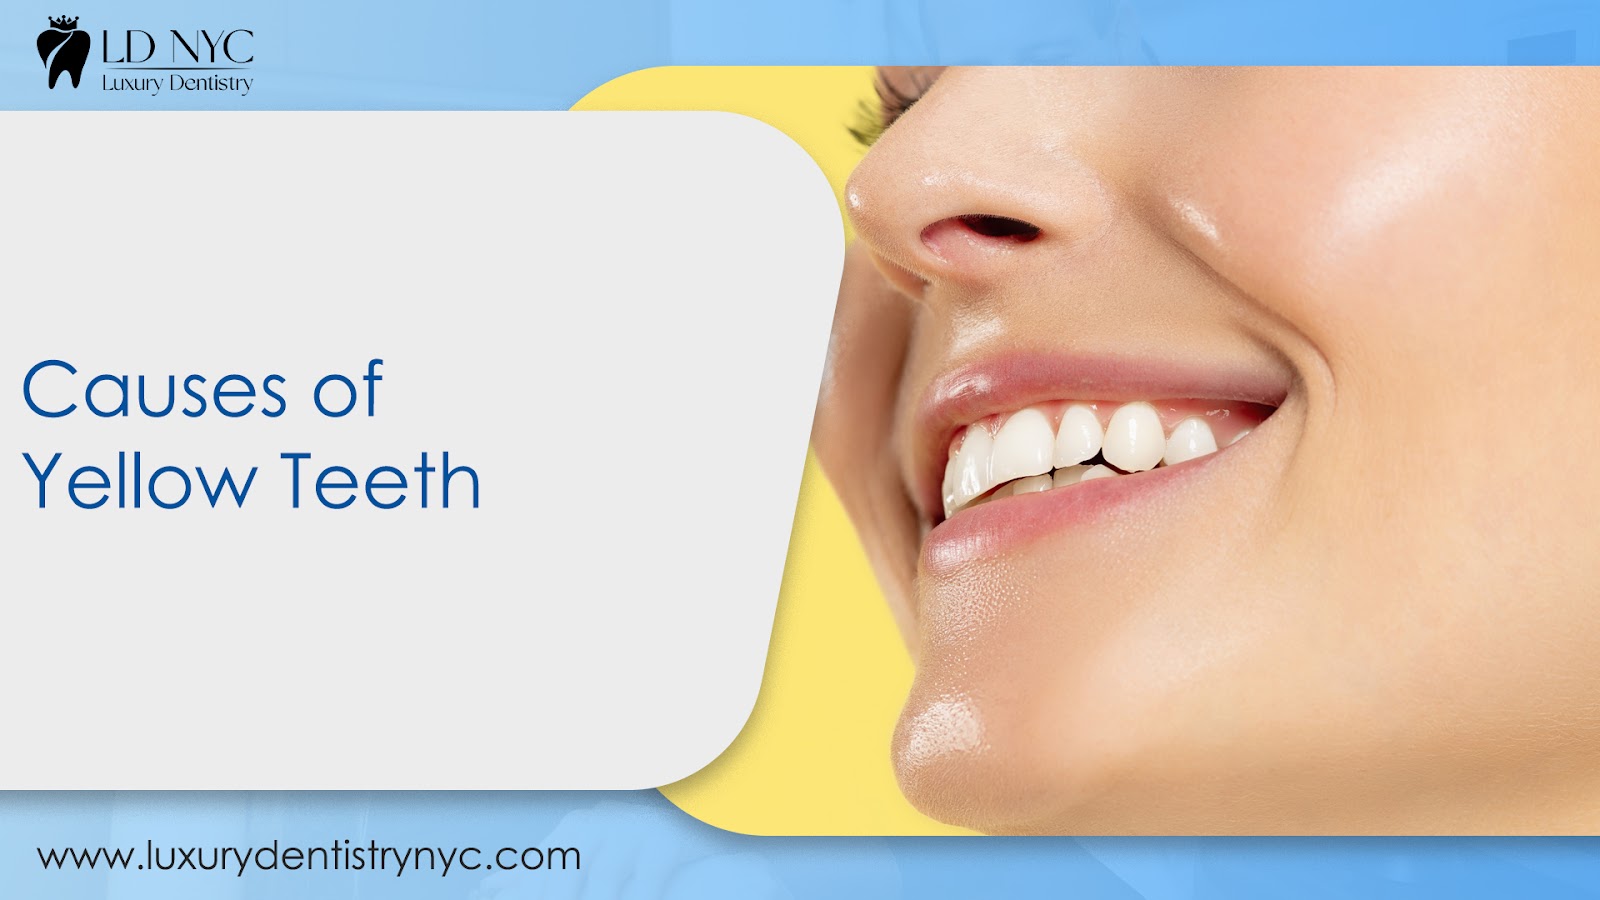 Causes of Yellow Teeth